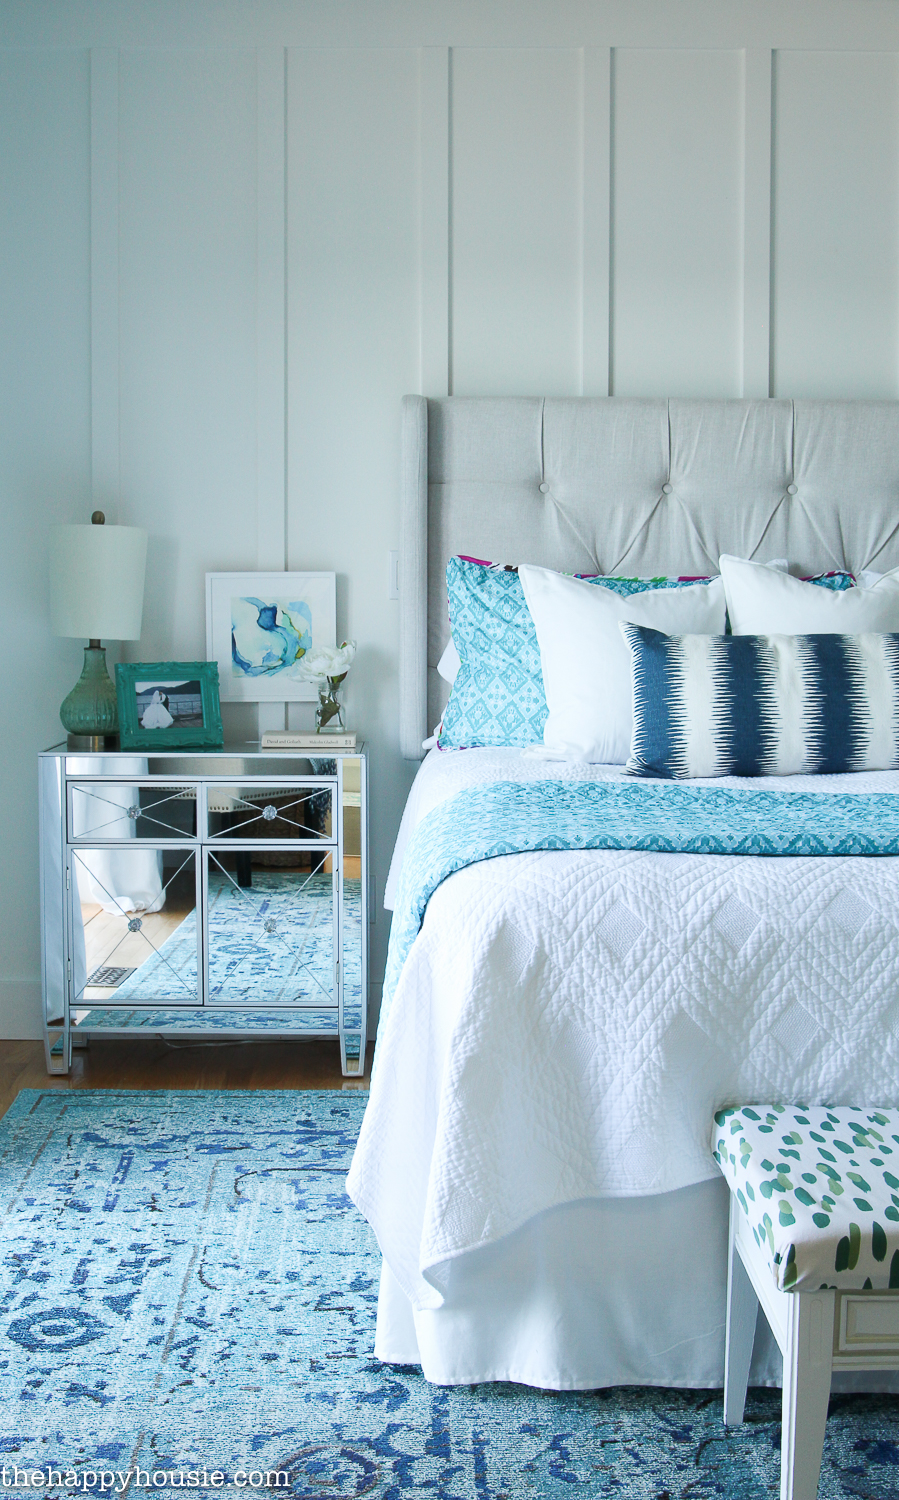 How to Decorate Your Master Bedroom on a Budget | The ...